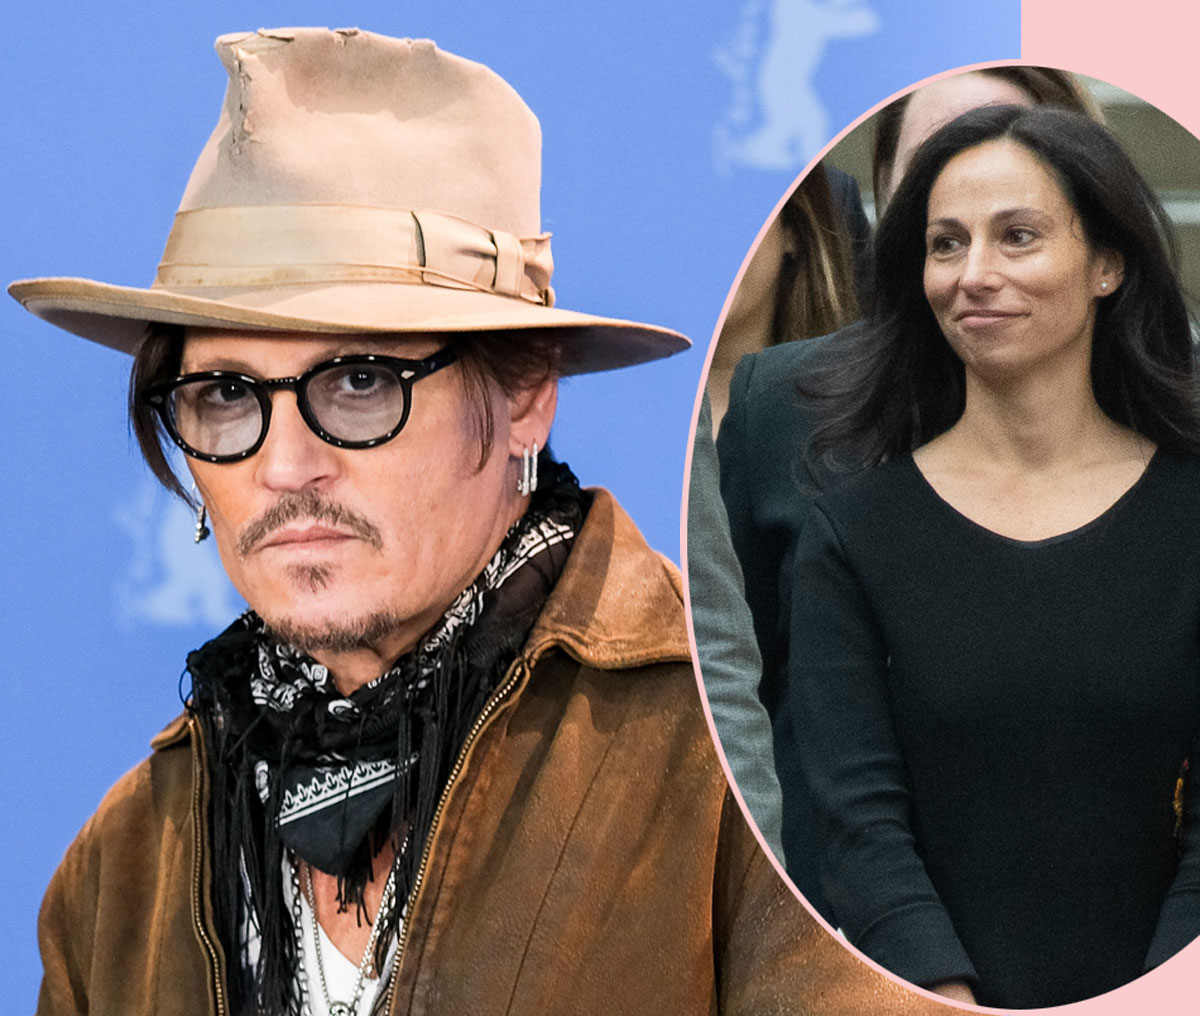 #Johnny Depp & Attorney Ex-Girlfriend Are Apparently Back On With Vegas VIP Date!